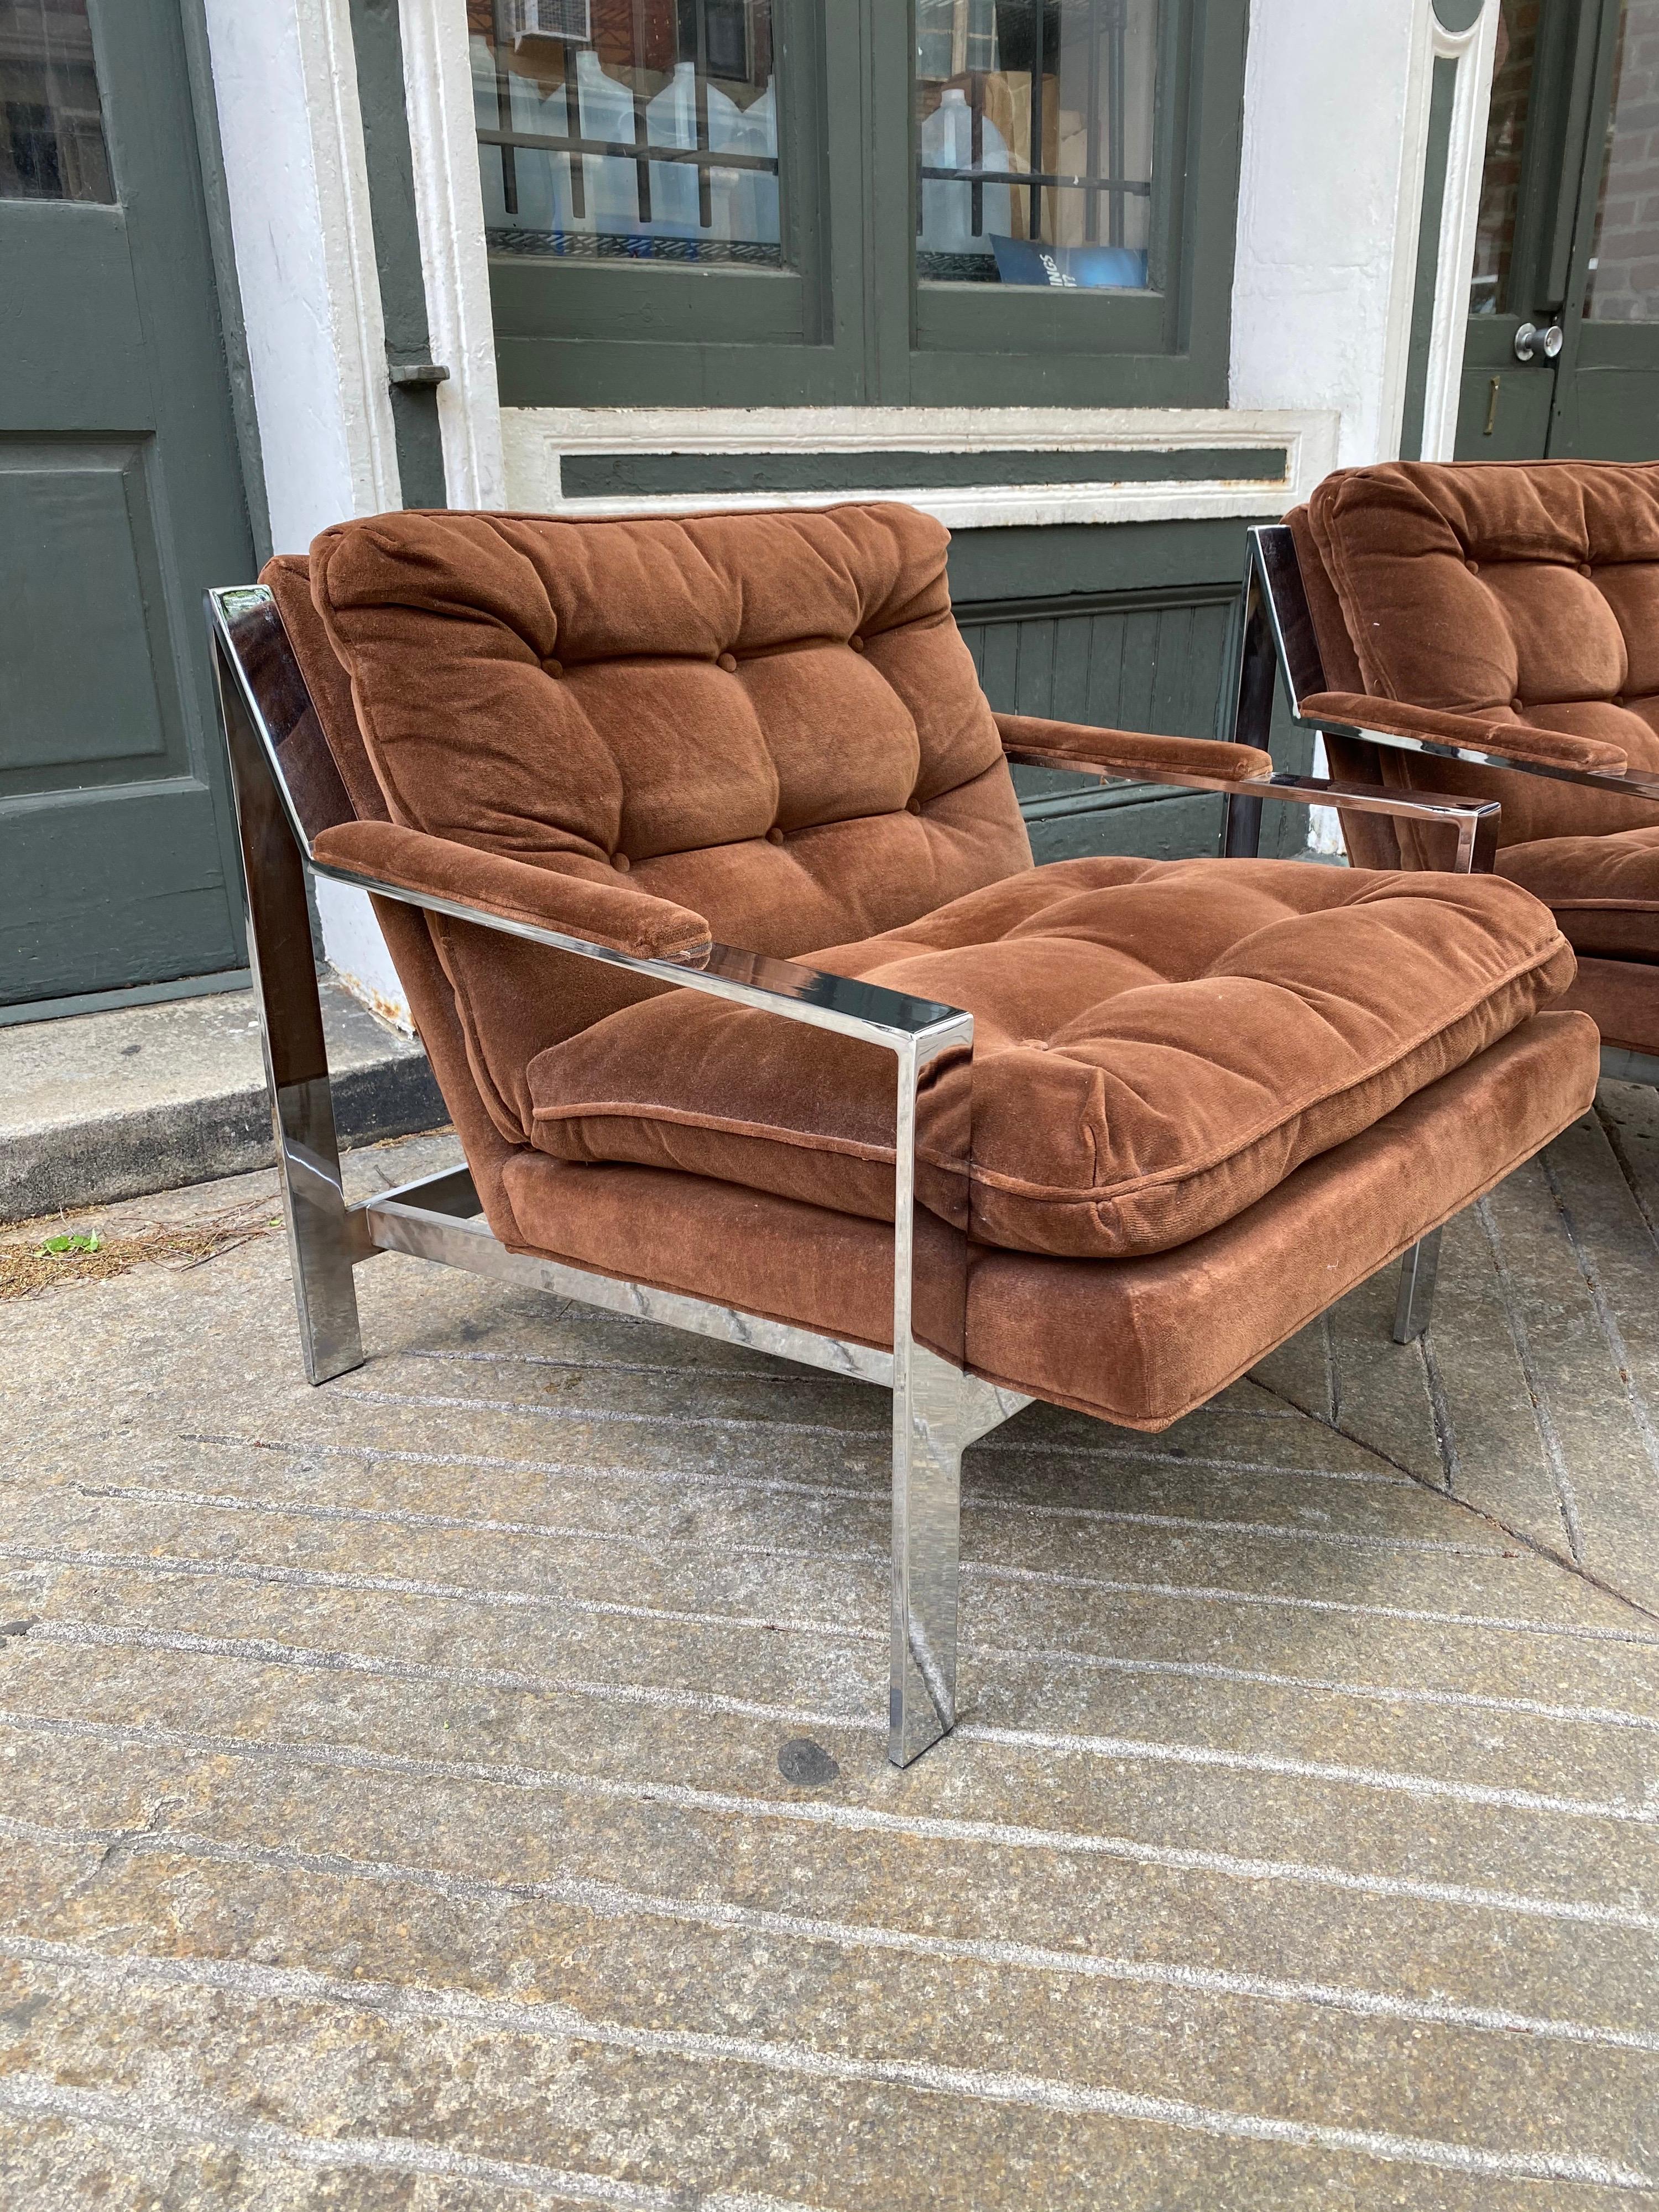 Pair of Cy Mann chrome and upholstered lounge chairs. All original with their brown velvet material! Very comfy!